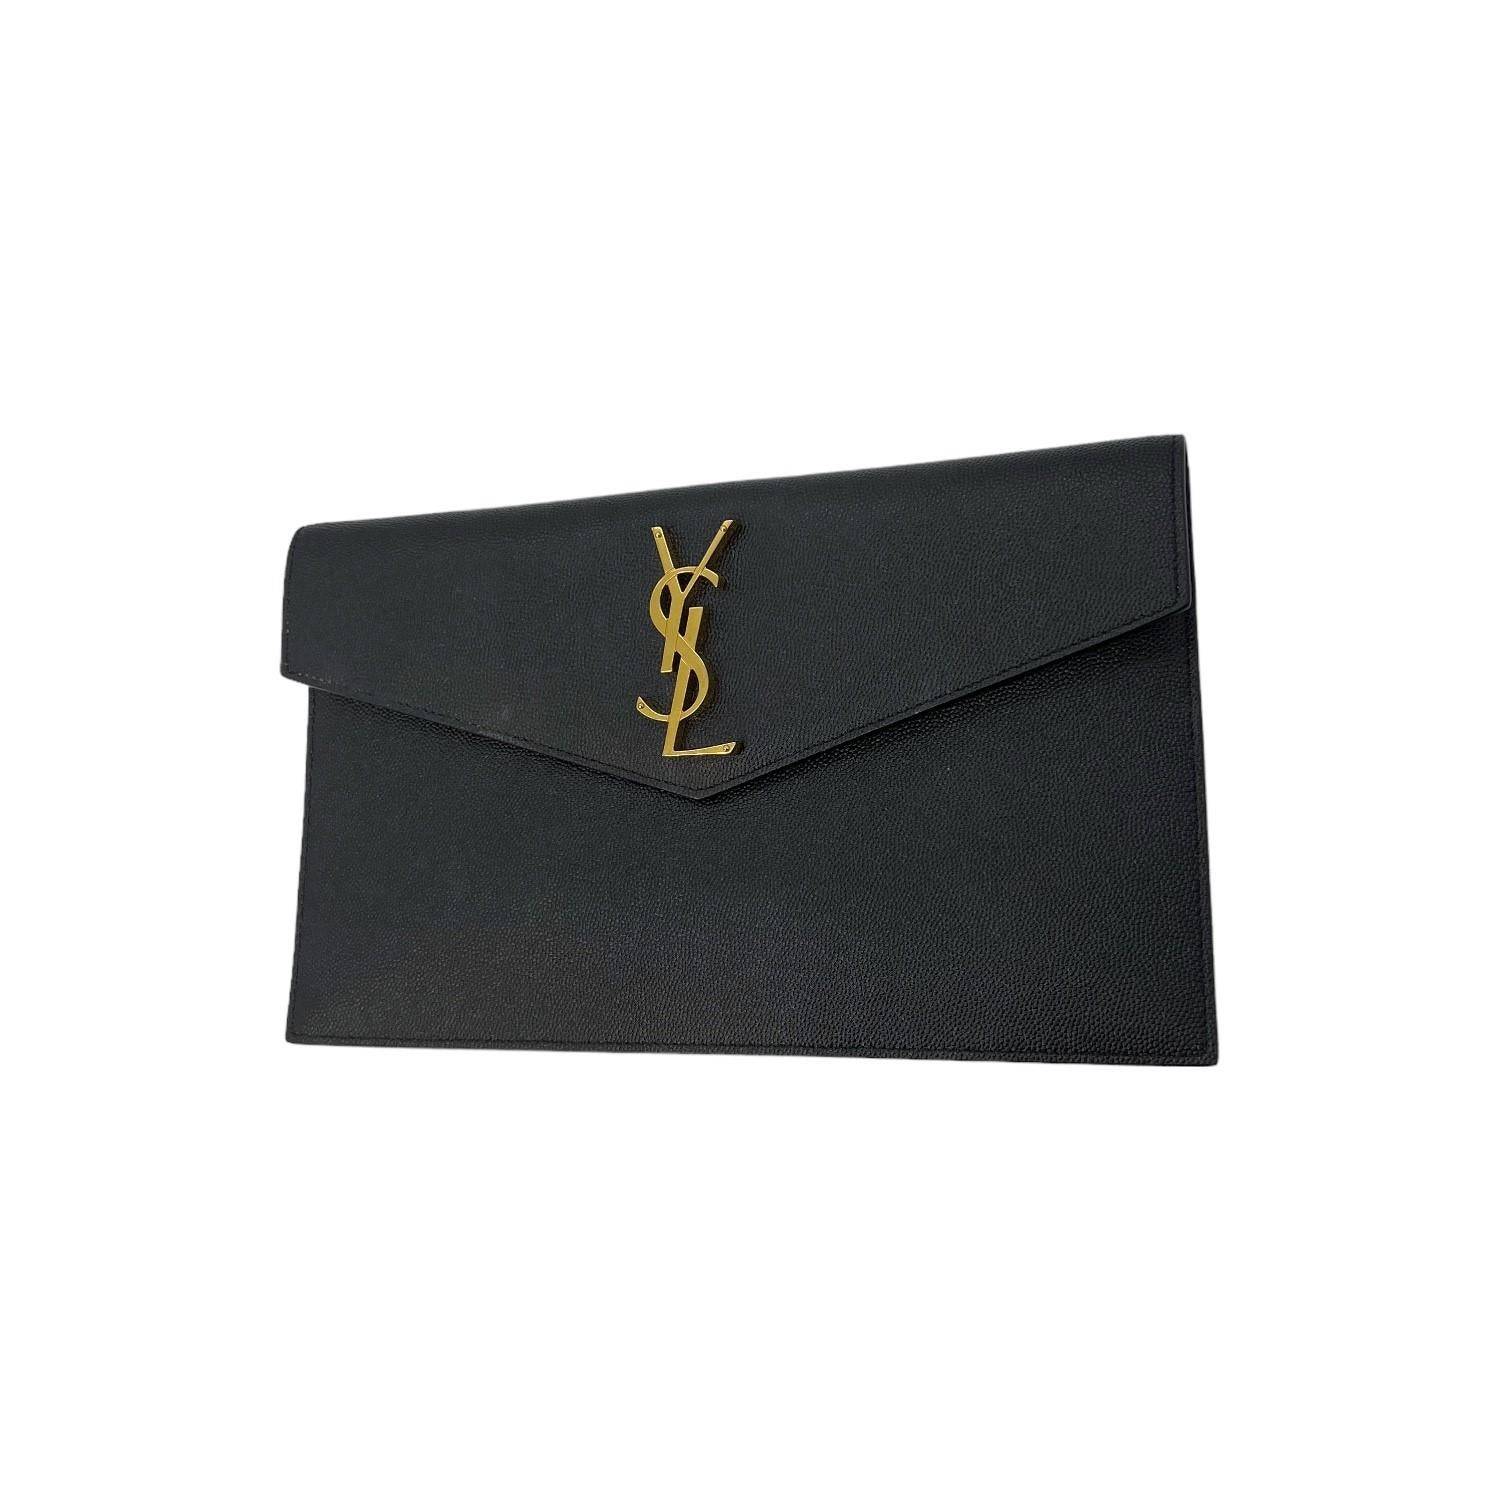 This Saint Laurent Uptown Envelope Pouch was made in Italy and it is finely crafted of black leather with a gold-tone hardware 'YSL' logo. It has a fold over magnetic closure that opens up to a black grosgrain interior.

Brand: Saint